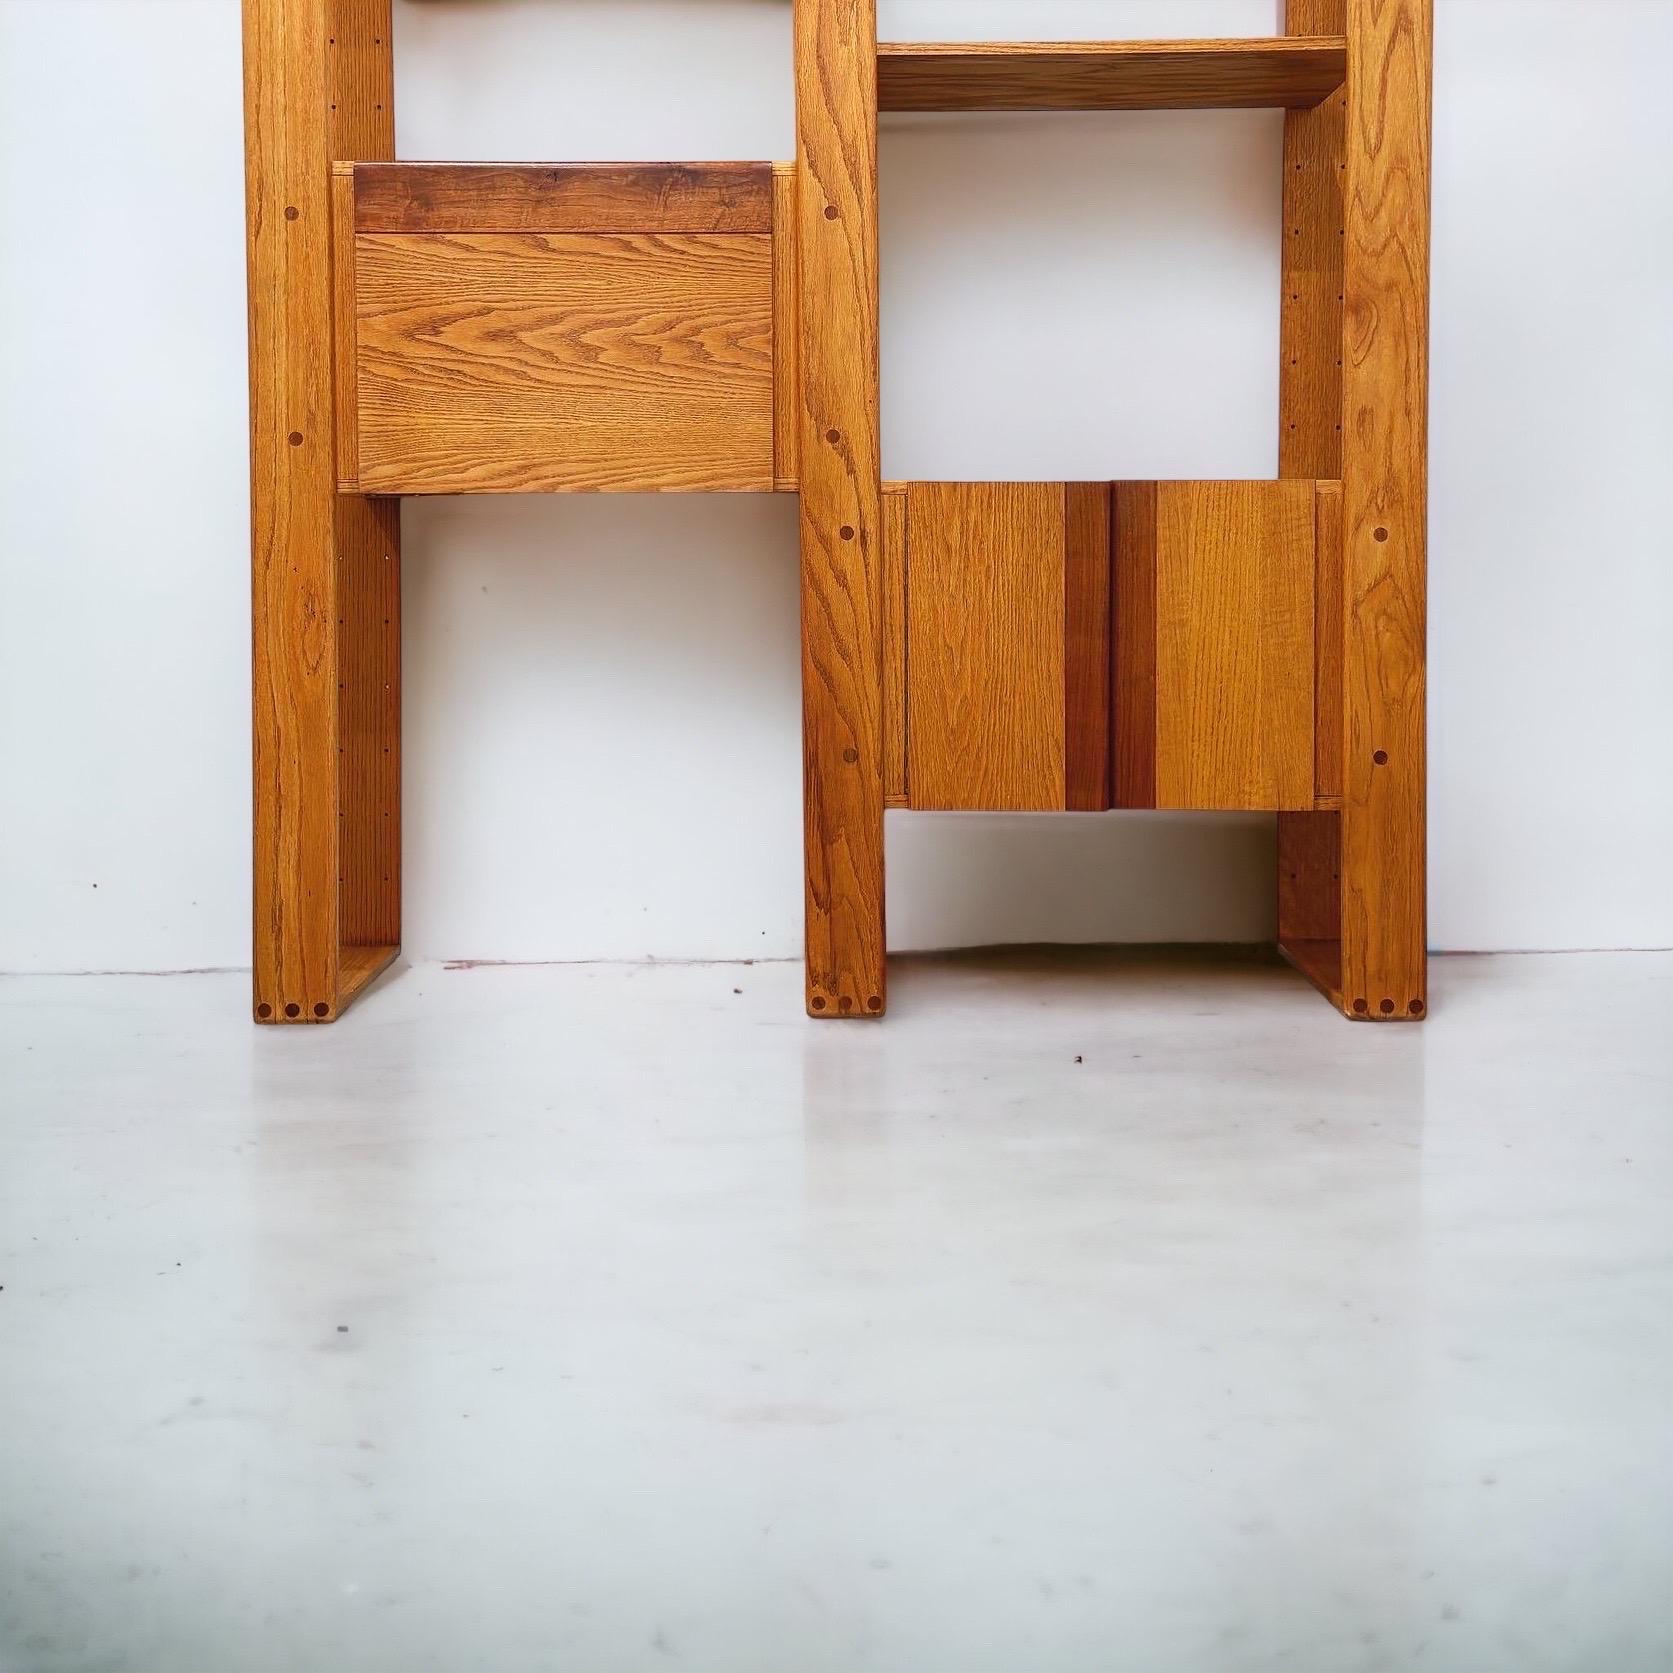 Lou Hodges handcrafted solid oak wall unit for California Design Group, signed and date 1978. This piece has been professionally restored and attended to by our team - it is in excellent condition and is ready for use.

